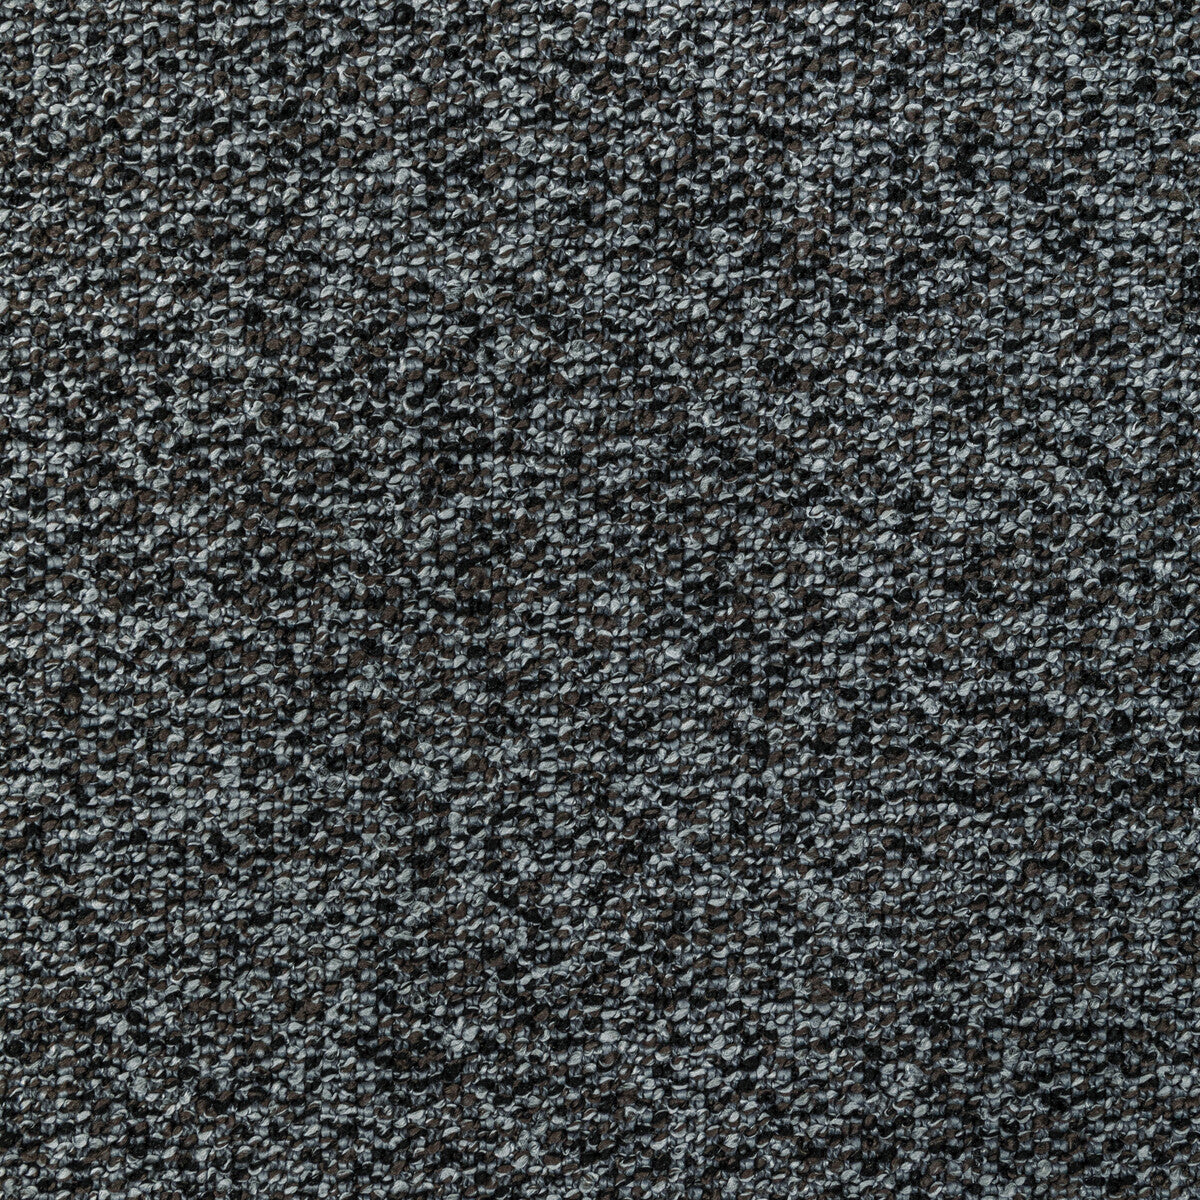 Mathis fabric in charcoal color - pattern 36699.811.0 - by Kravet Contract in the Refined Textures Performance Crypton collection